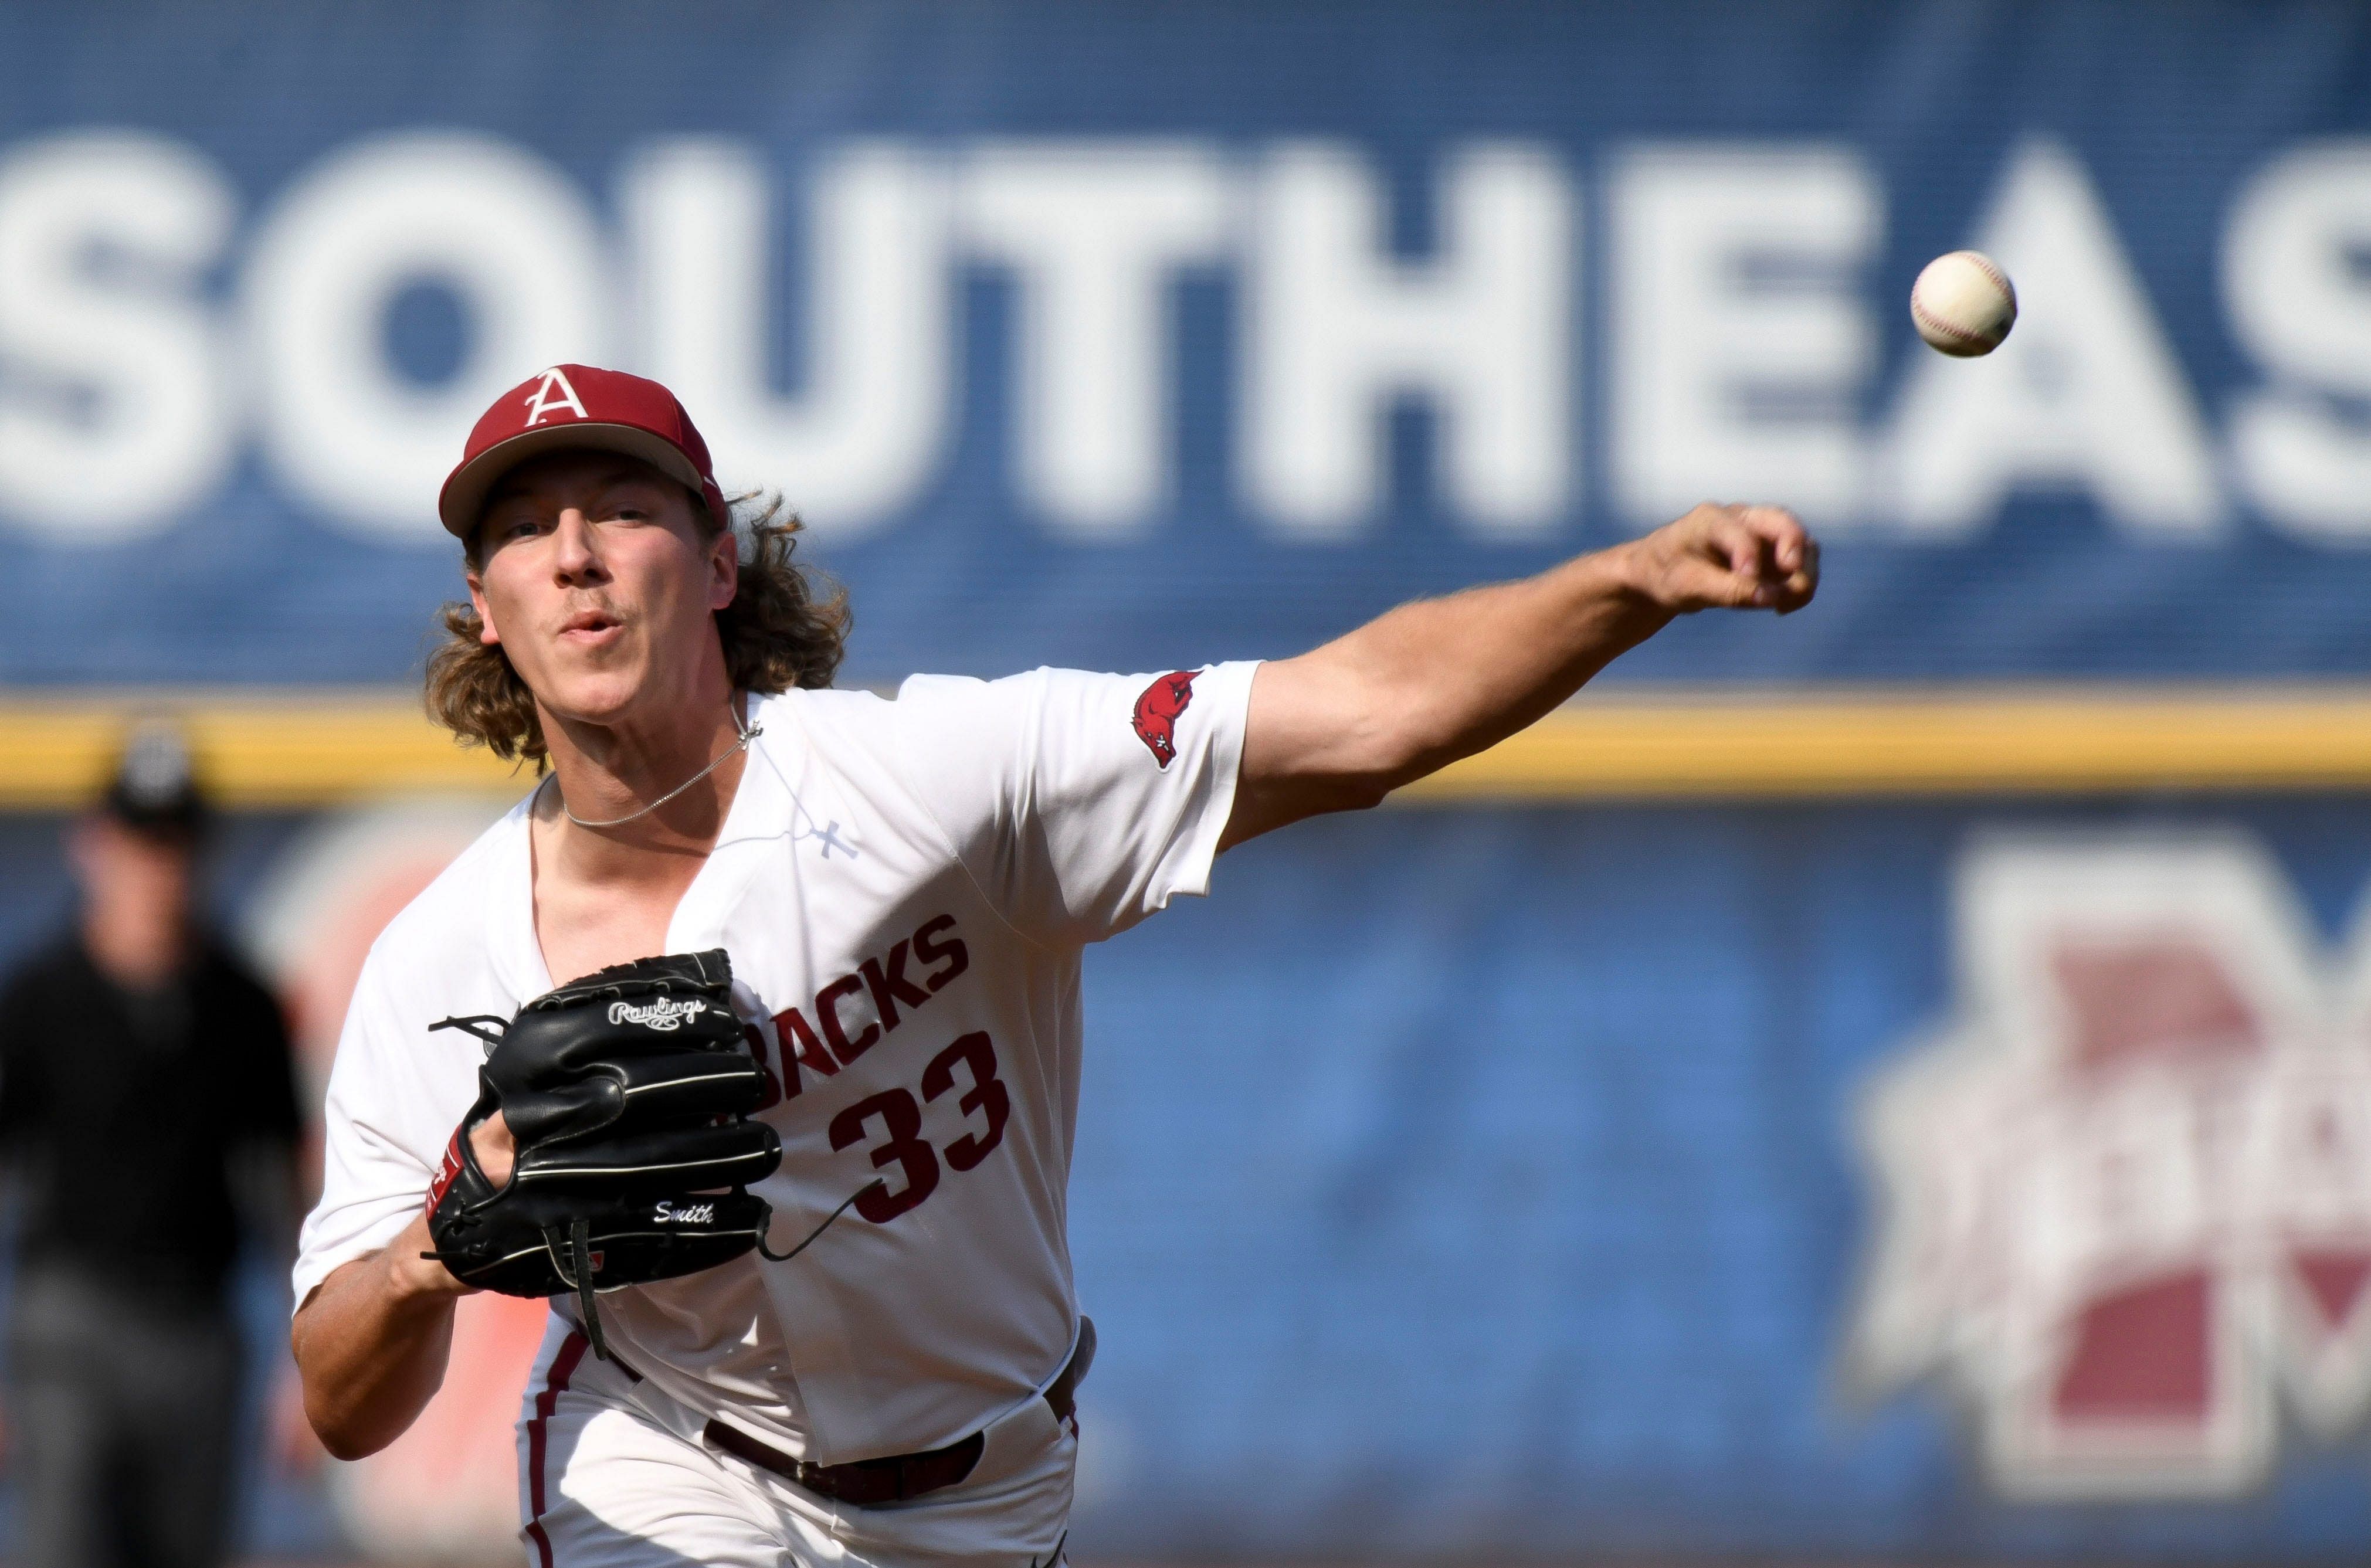 Hagen Smith is 9-0 with 125 strikeouts for Arkansas this season.